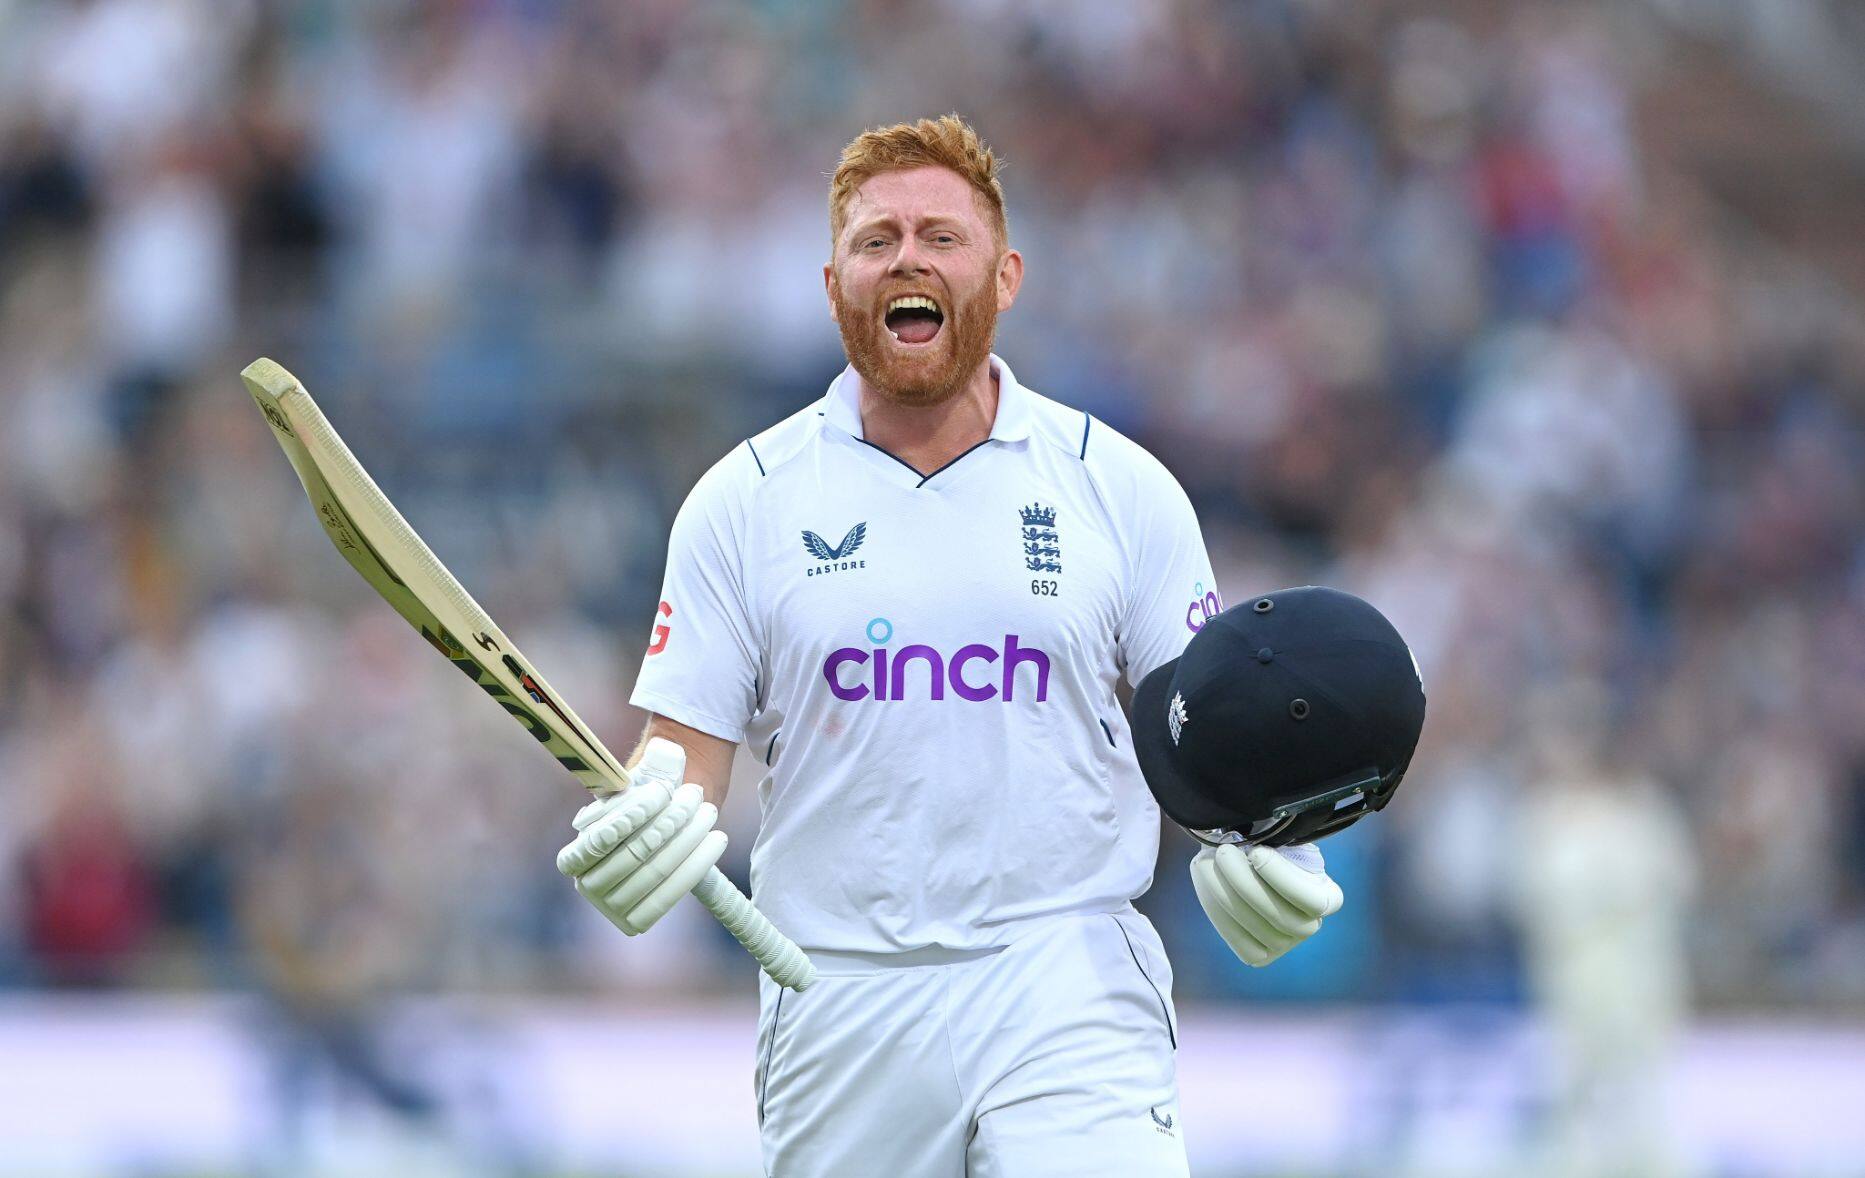 Bairstow does not fit into England's middle-order: Former England pacer